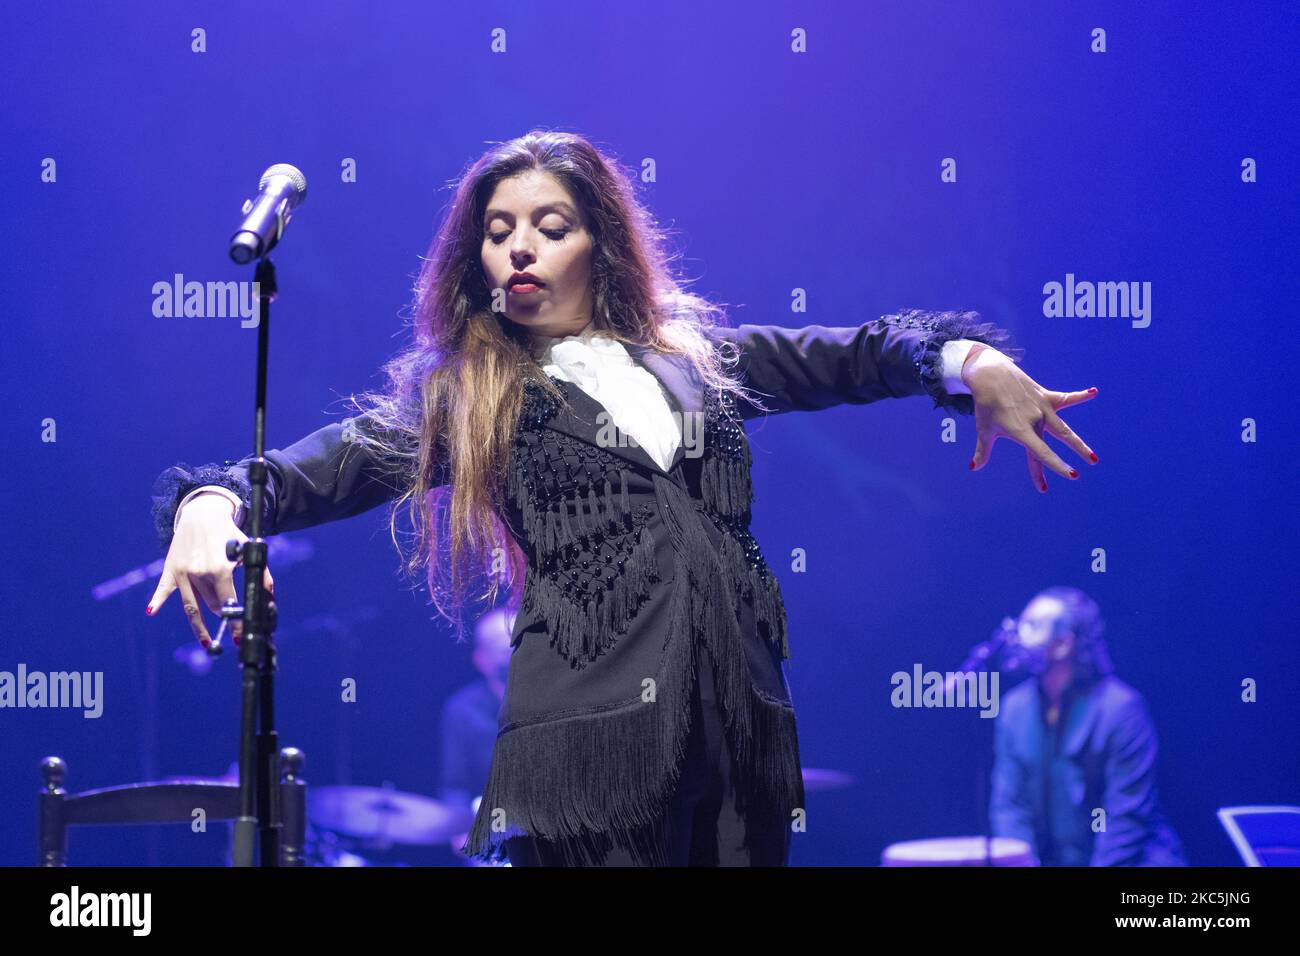 Spanish flamenco singer Solea Morente performs on stage during the Suma Flamenca festival at Teatros del Canal on December 10, 2020 in Madrid, Spain. (Photo by Oscar Gonzalez/NurPhoto) Stock Photo